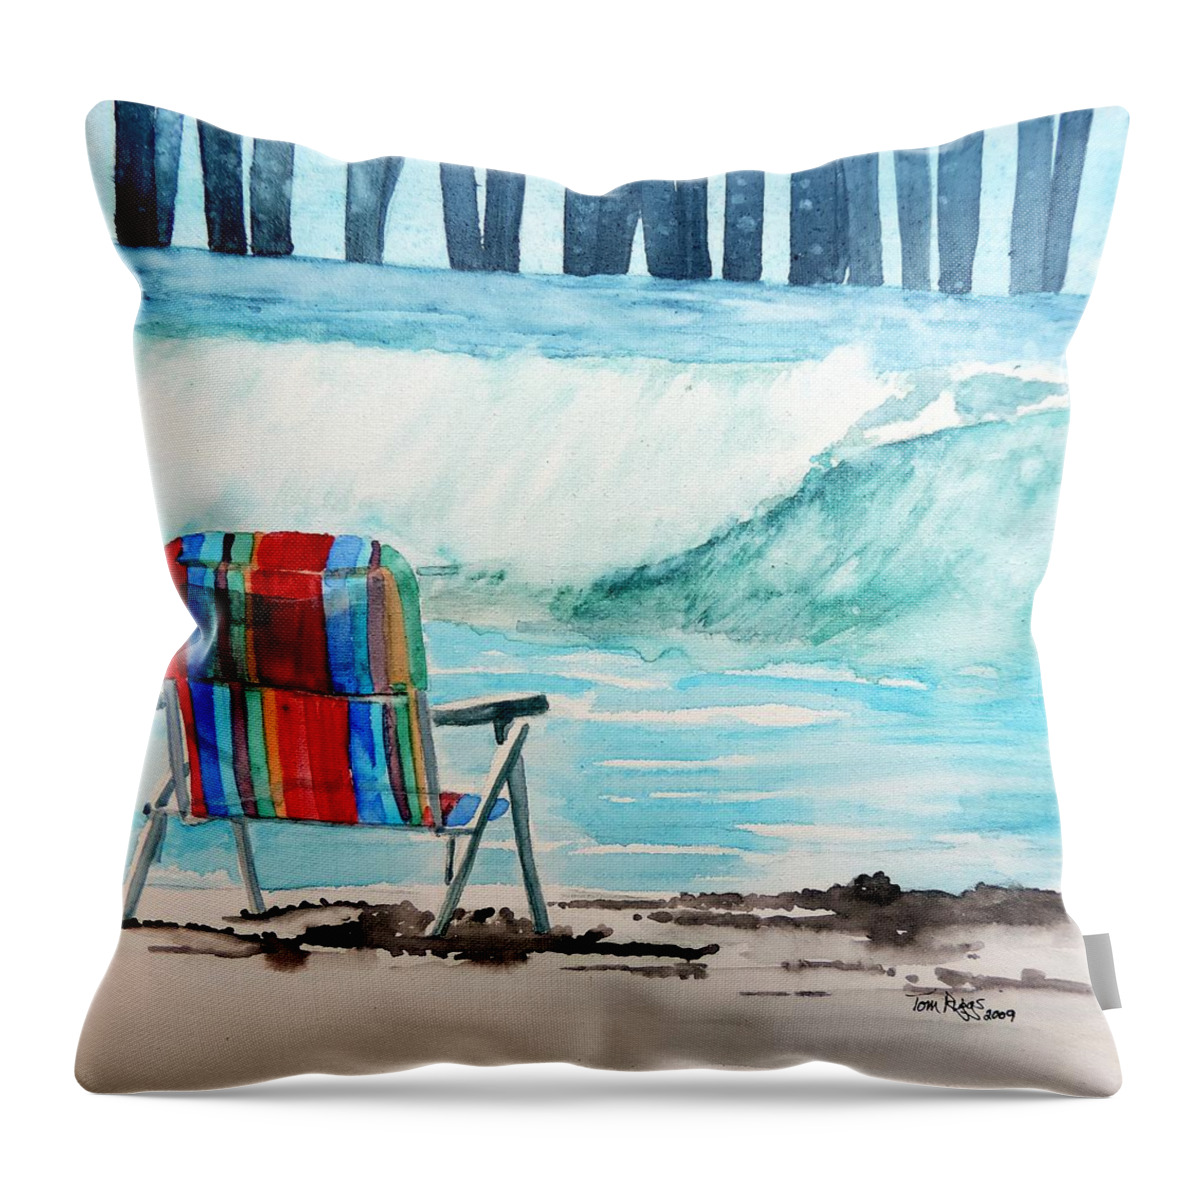 Watercolor Throw Pillow featuring the painting Gone Swimmin' by Tom Riggs